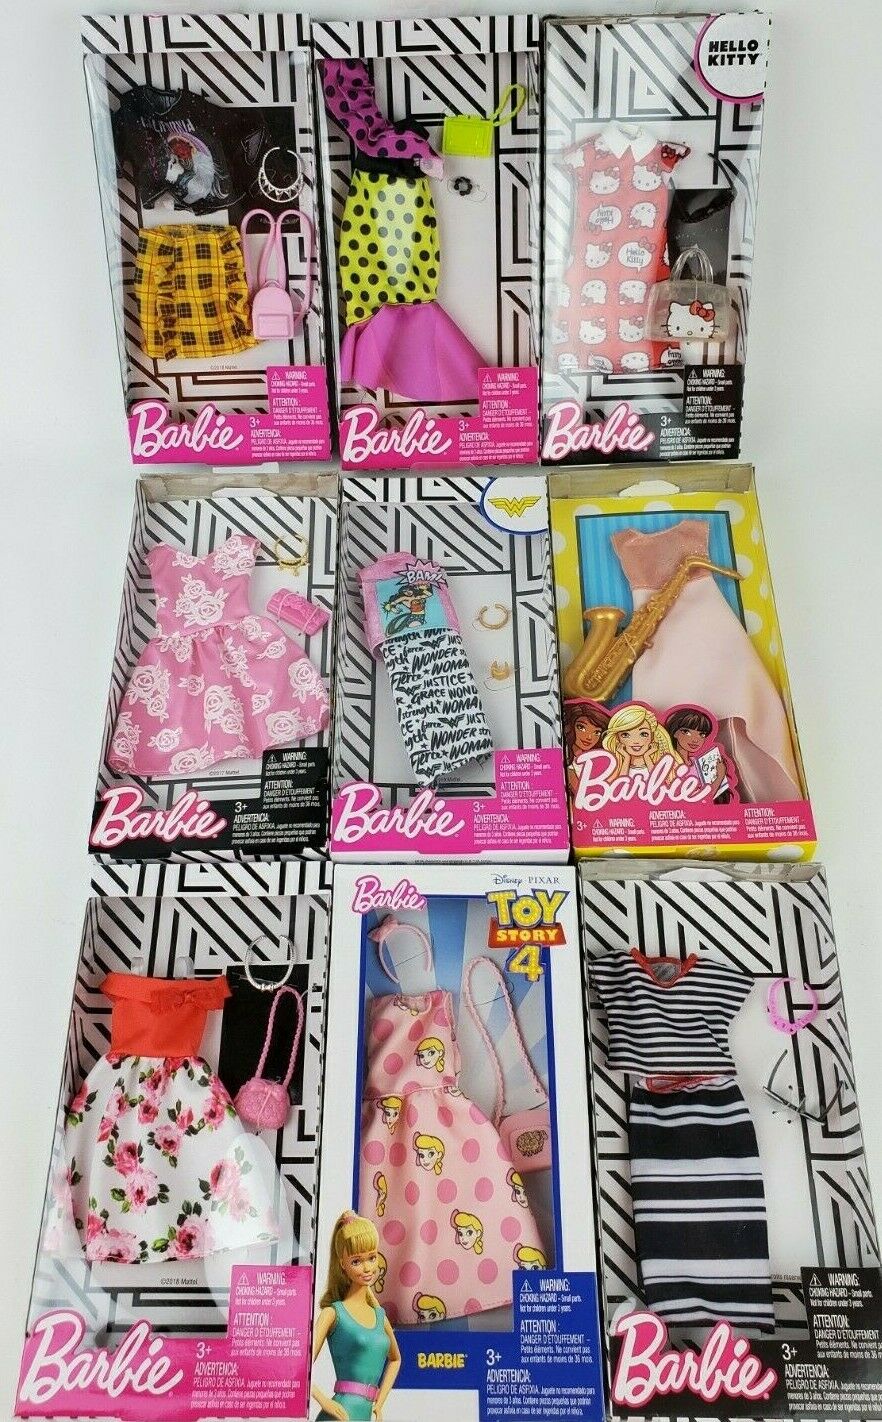 Barbie Complete Fashion Looks Clothing Packs Lot Of 2 Styles May Vary